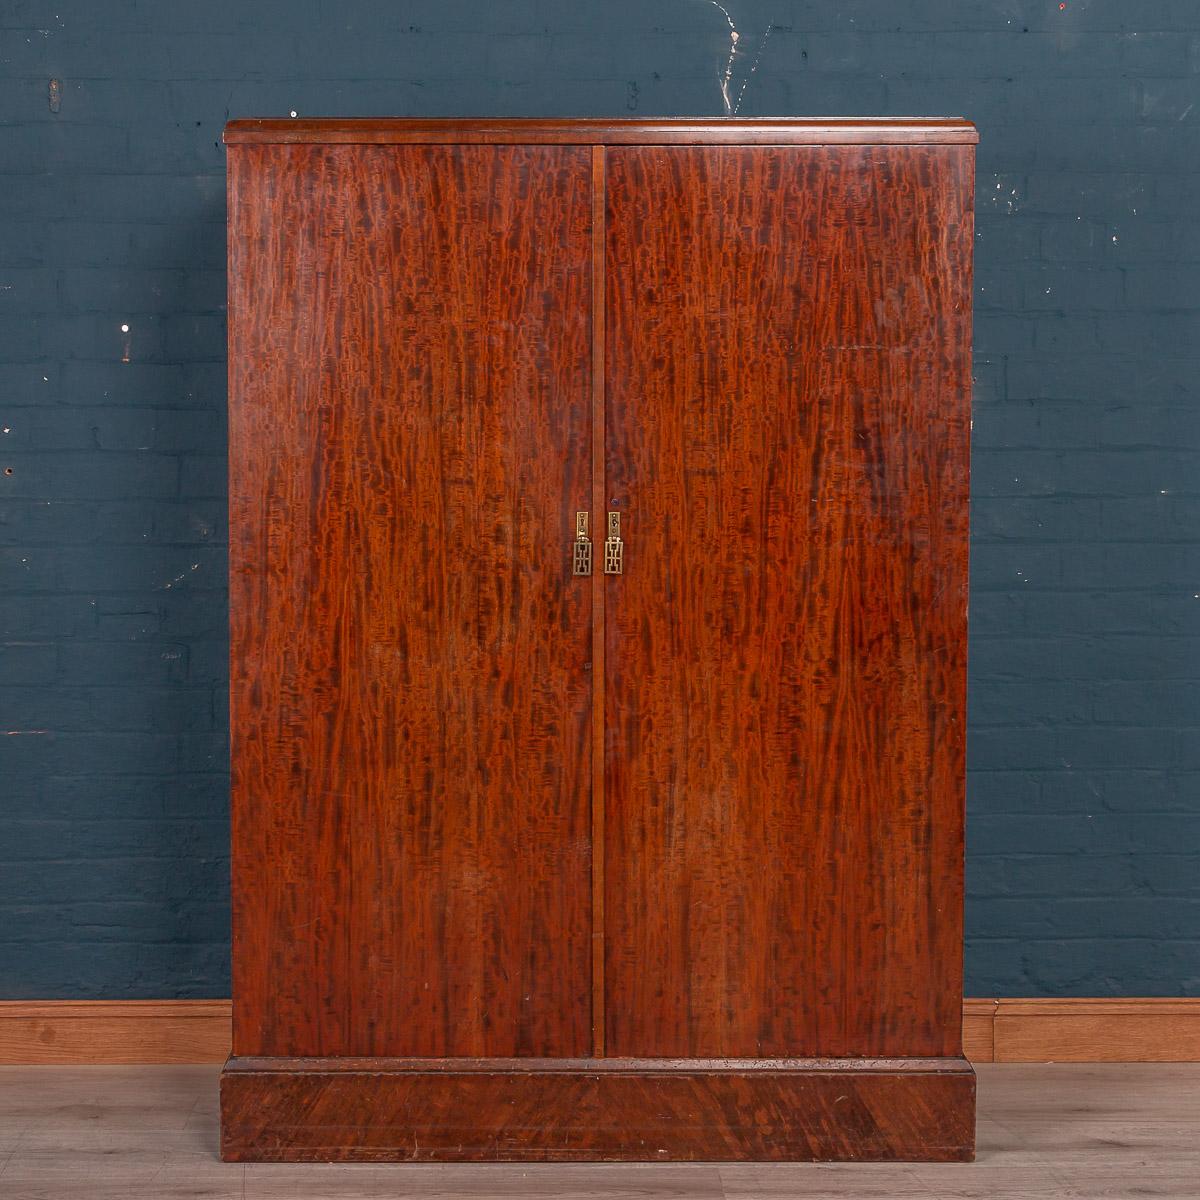 Antique 20th century English rare Art Deco wardrobe by Compactom. Beautiful piece of furniture, looking very anonymous when closed but once opened reveals a wonderful array of compartments for the gentleman’s wardrobe of the period, including